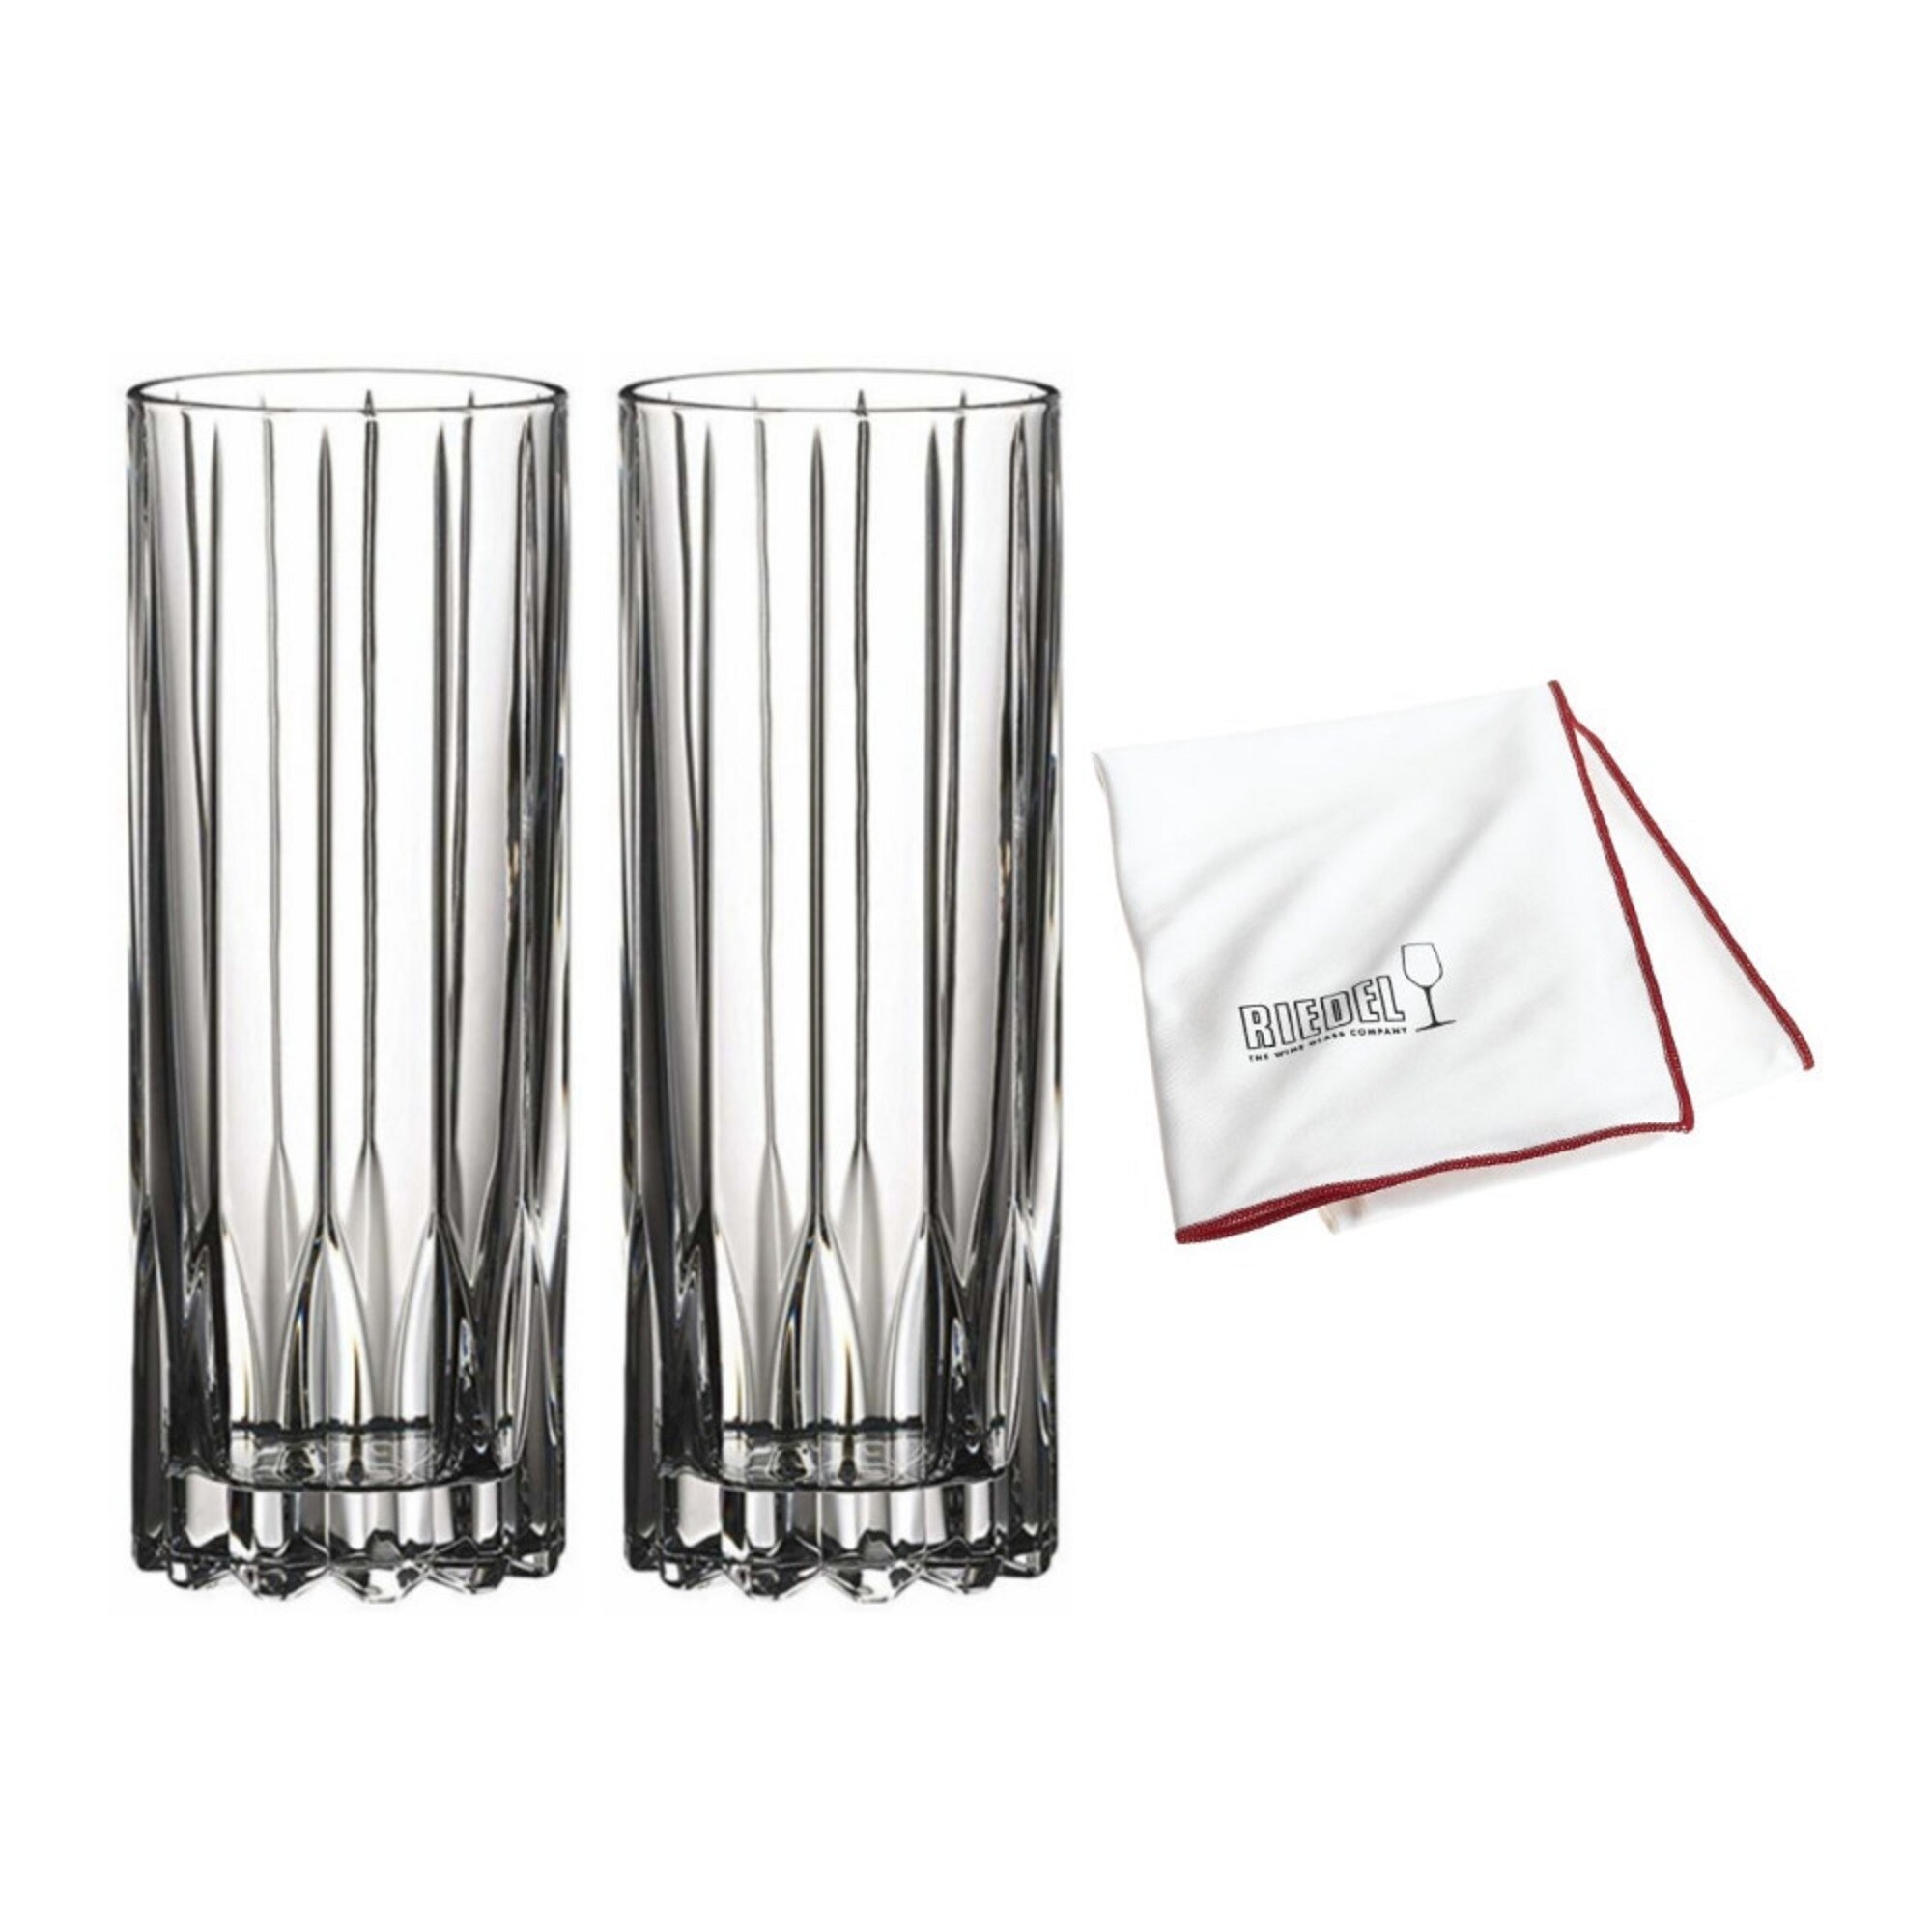 https://ak1.ostkcdn.com/images/products/is/images/direct/ca15a88f50c687176cefb8d5ee4508c324243aaf/Riedel-Drink-Specific-Glassware-Cocktail-Glass-%282-Pk%29-w--Cloth-Bundle.jpg